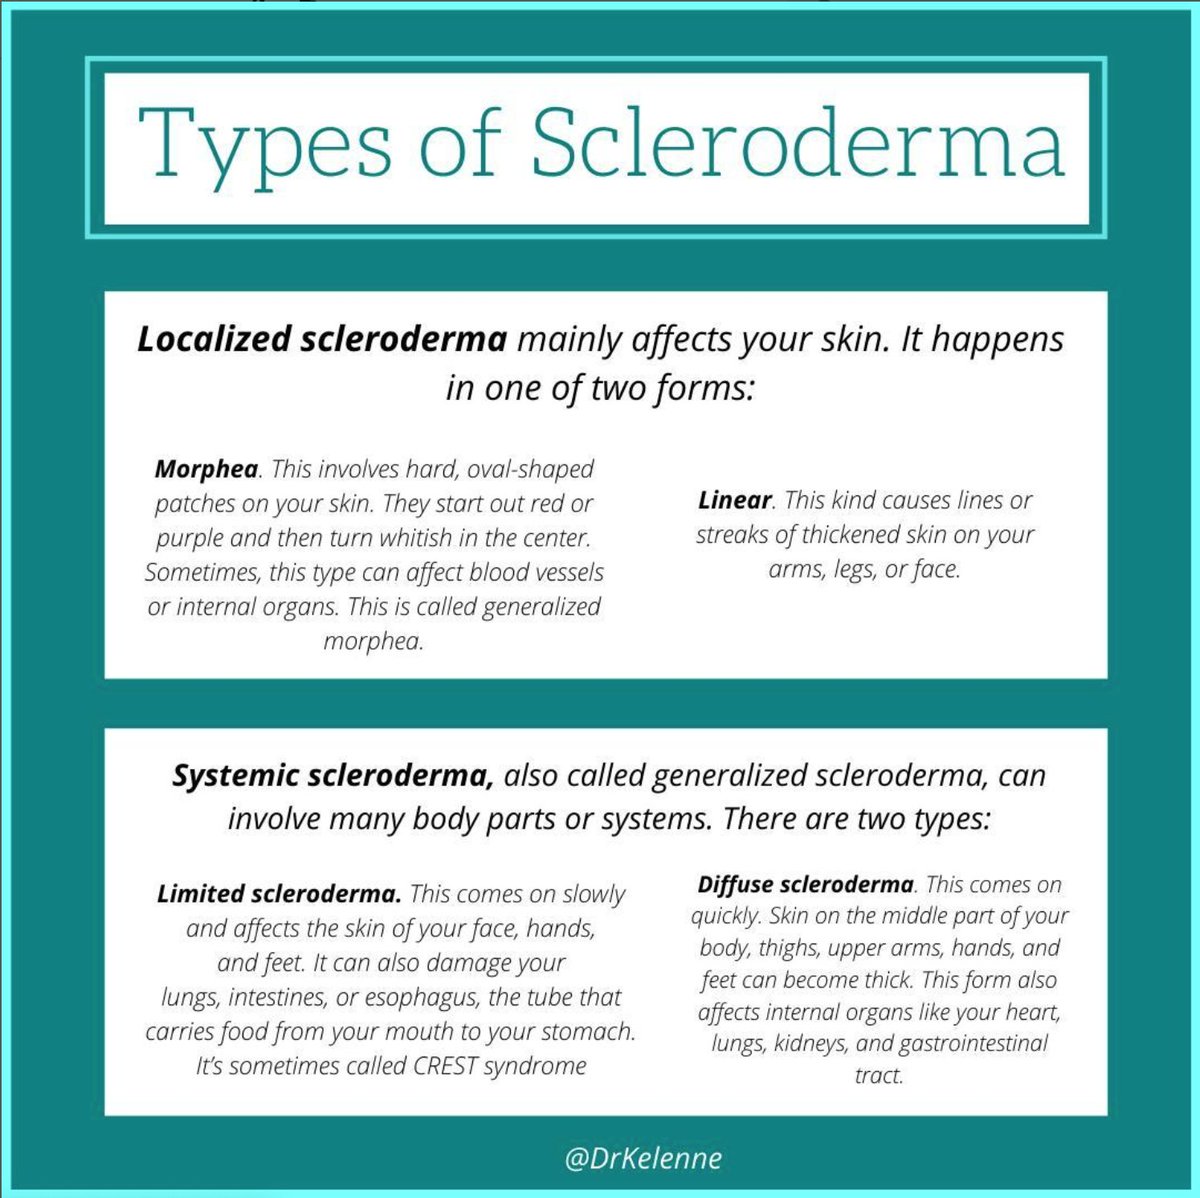 Scleroderma has two types and each type has two forms. Know the difference here. 

#healthcaretips #familymedicine #caribbean #blackdoctor #telemedicine #telehealth #yourcaribbeandoctor #sclerodermaawareness 🇹🇹🇻🇨🇵🇷🇦🇬🇧🇸🇧🇧🇧🇷🇨🇦🇫🇰🇬🇩🇬🇾🇯🇲🇭🇹🇱🇨🇰🇳